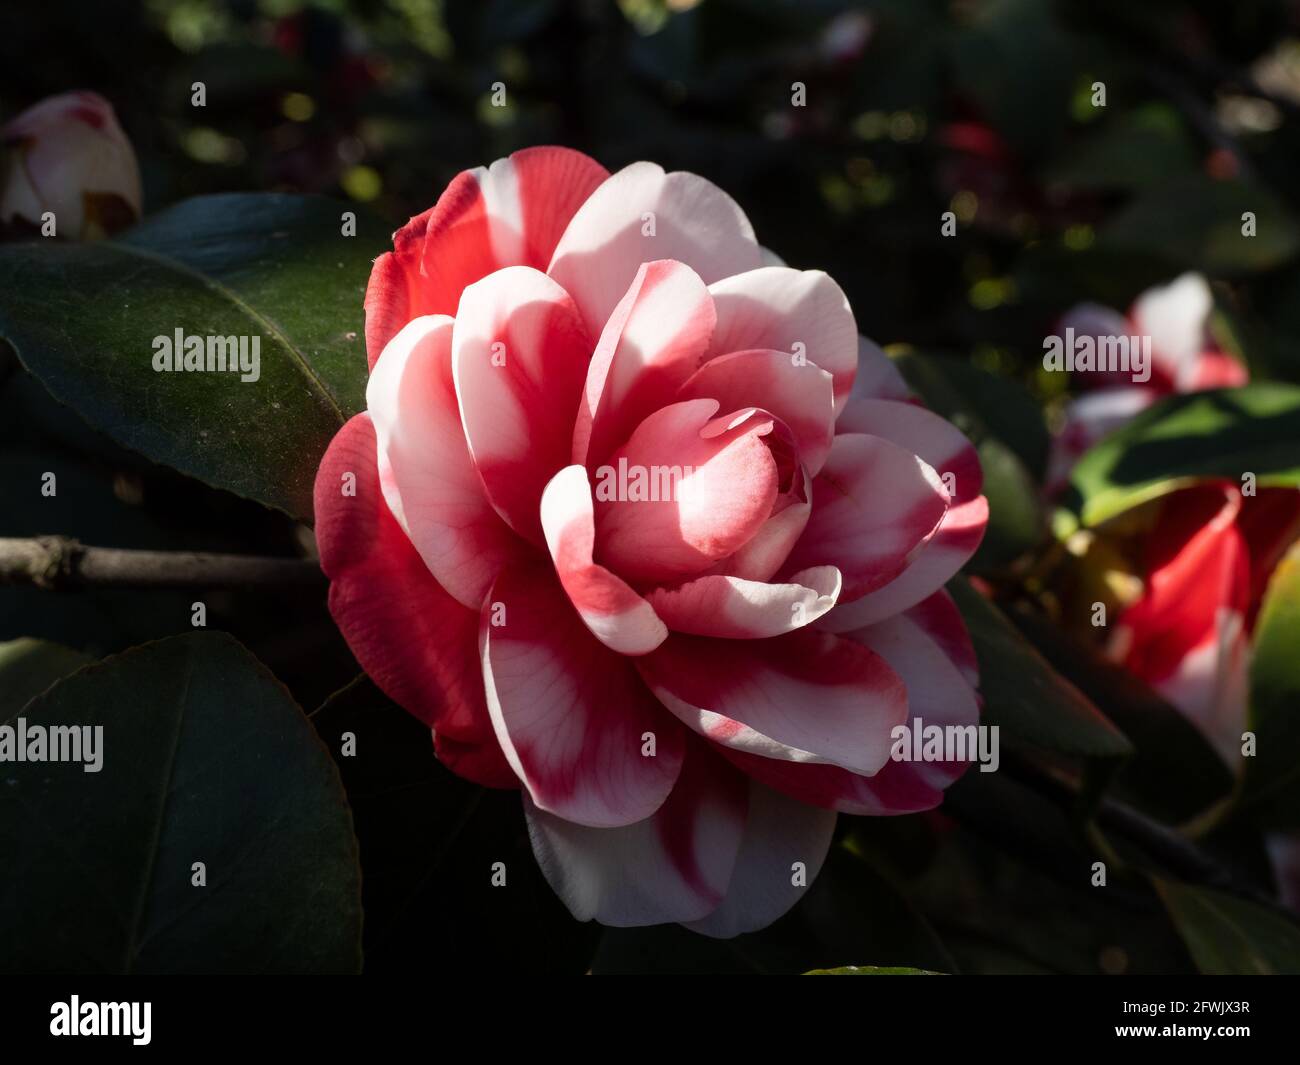 A flower of a red and white 'Camellia Japonica' camellia Stock Photo - Alamy